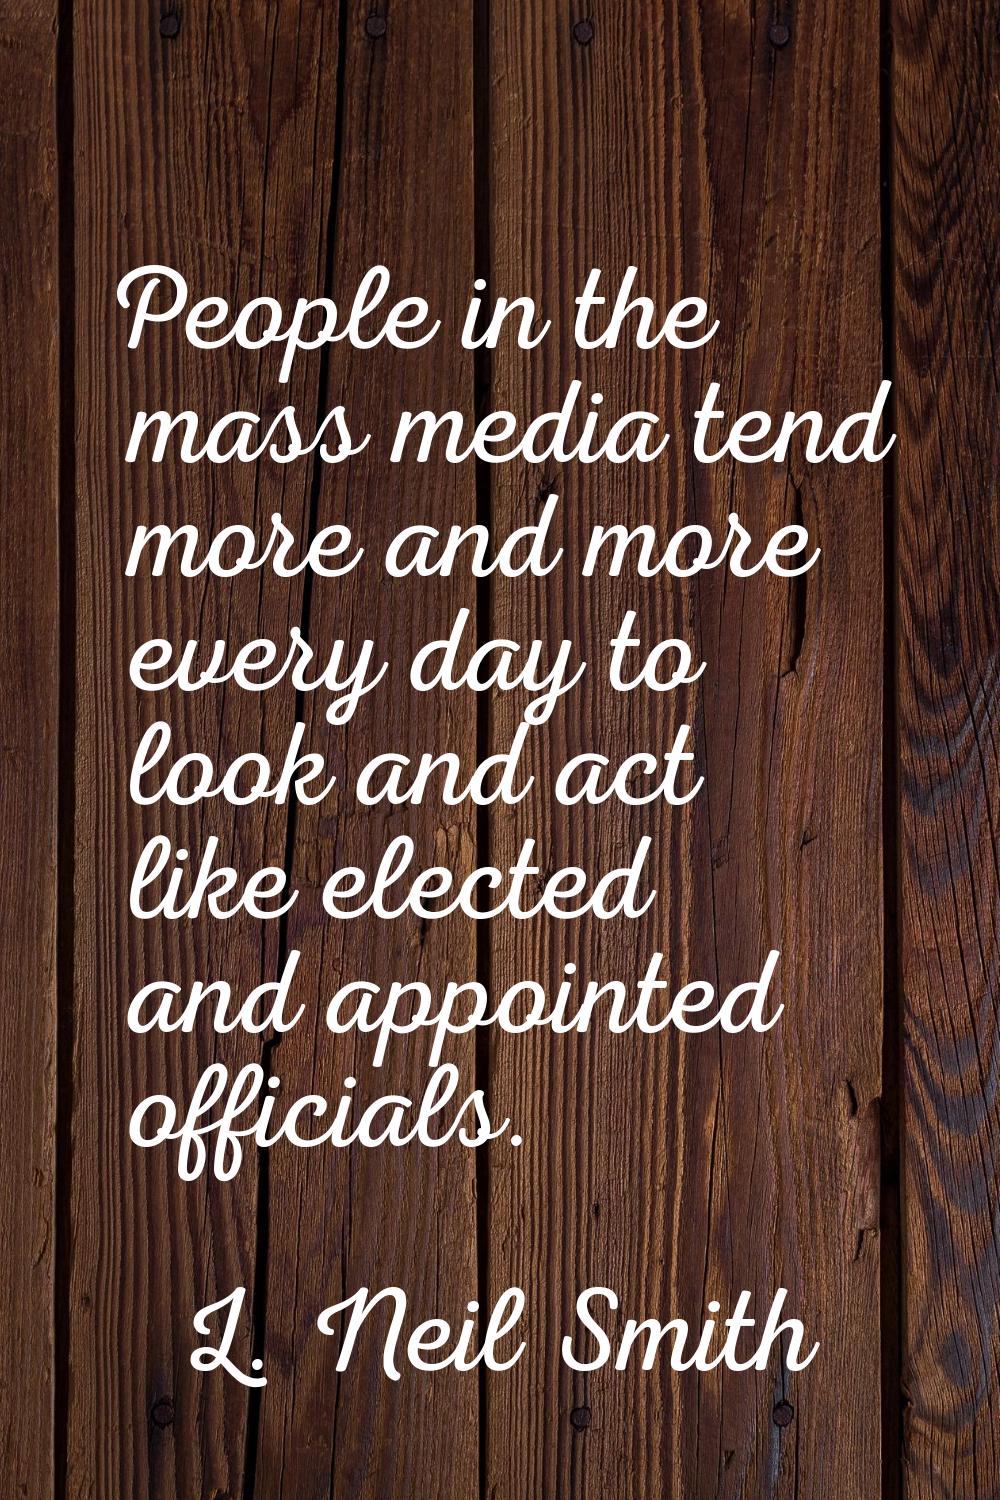 People in the mass media tend more and more every day to look and act like elected and appointed of